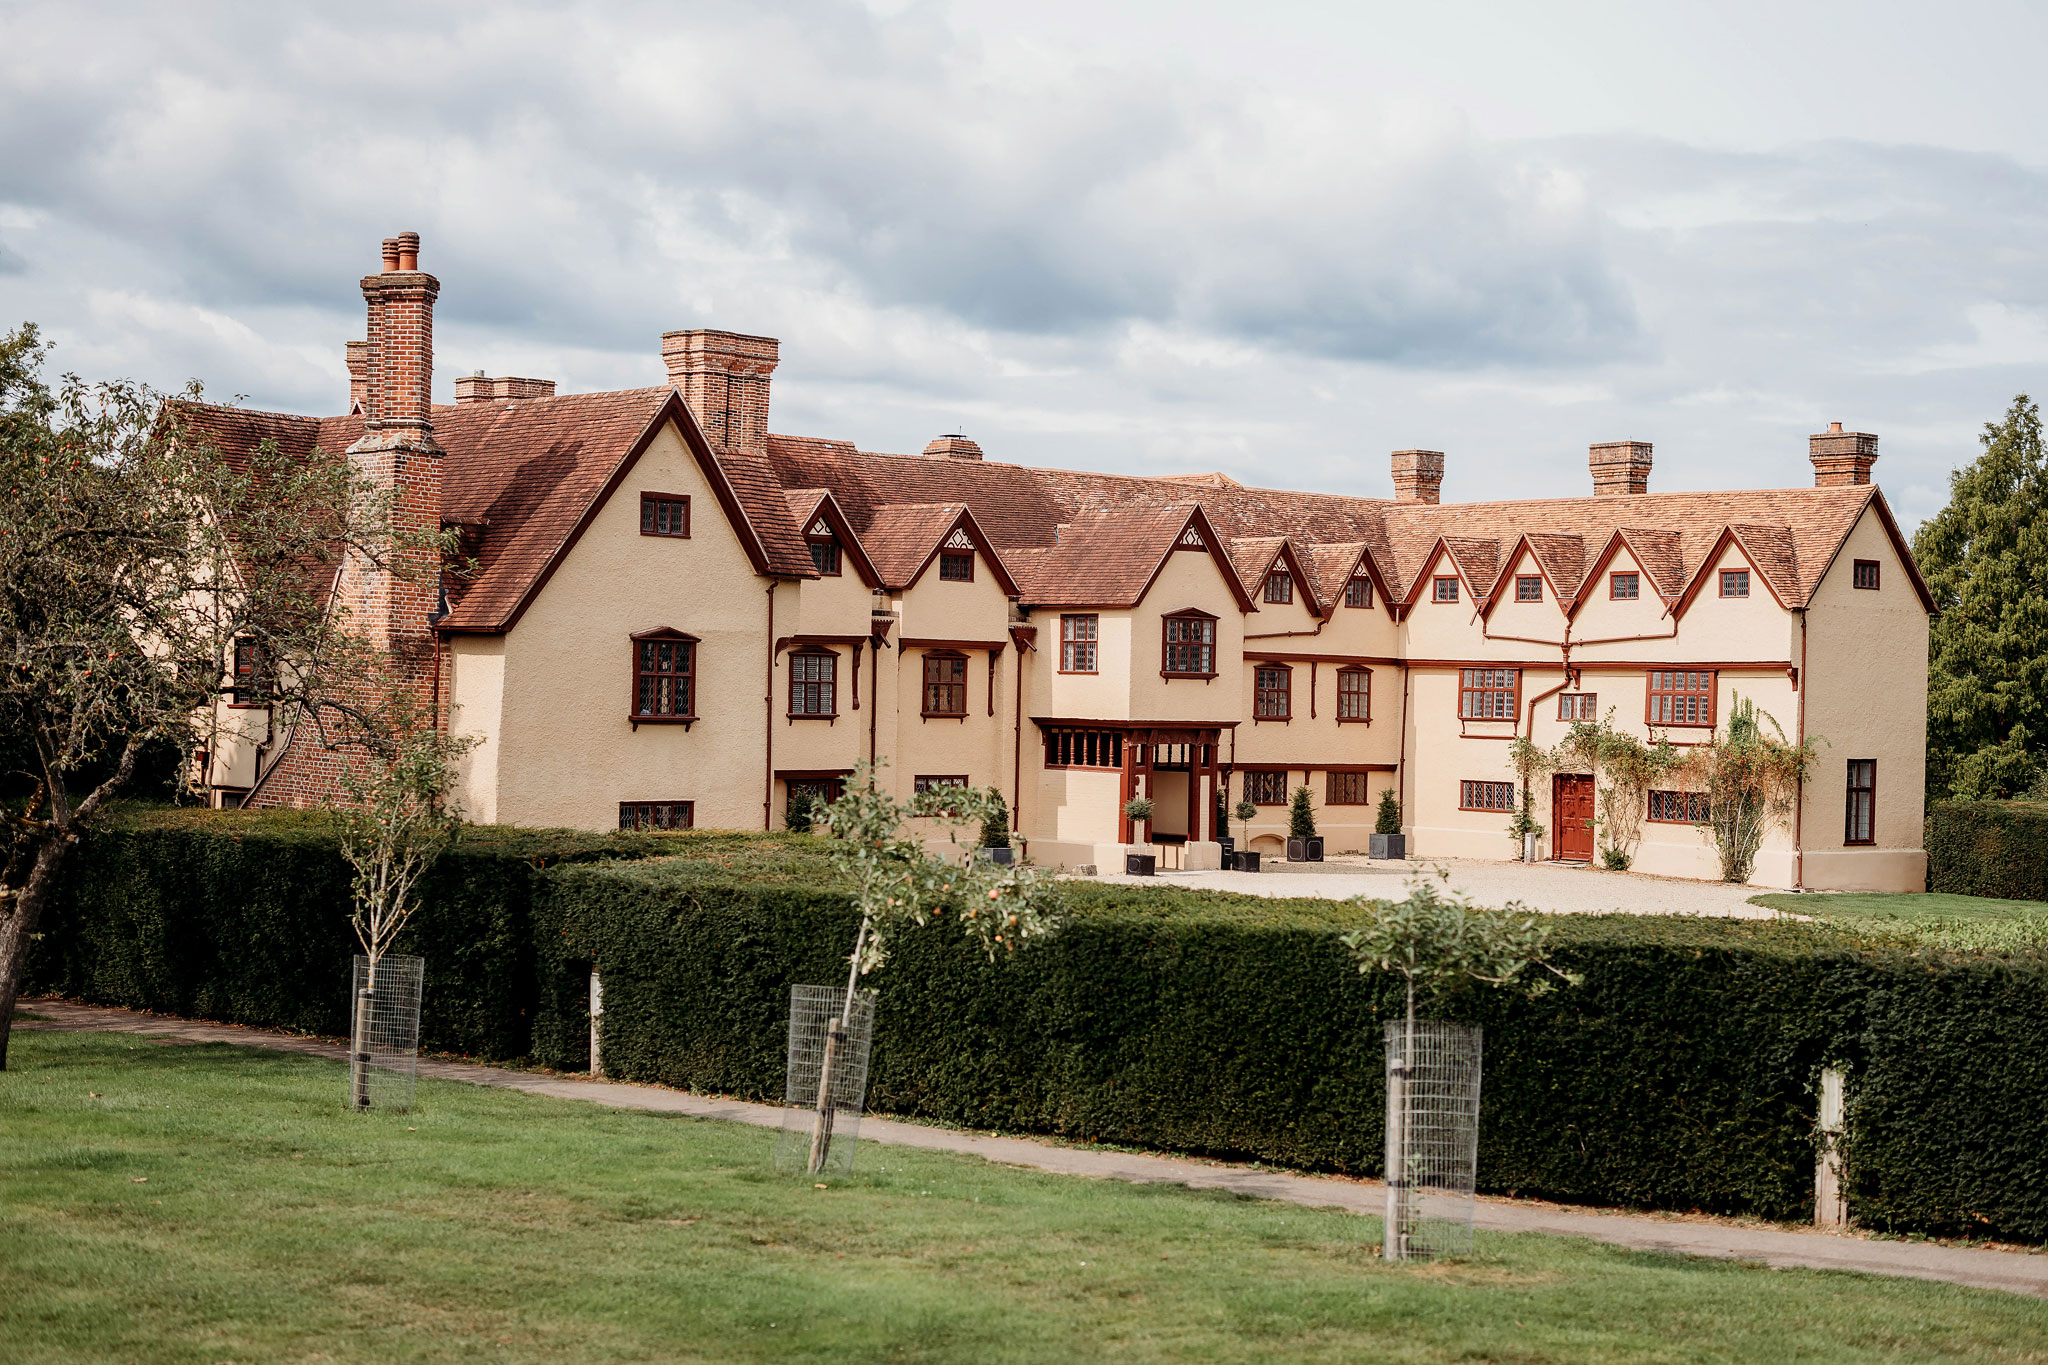 The main building of Ufton Court